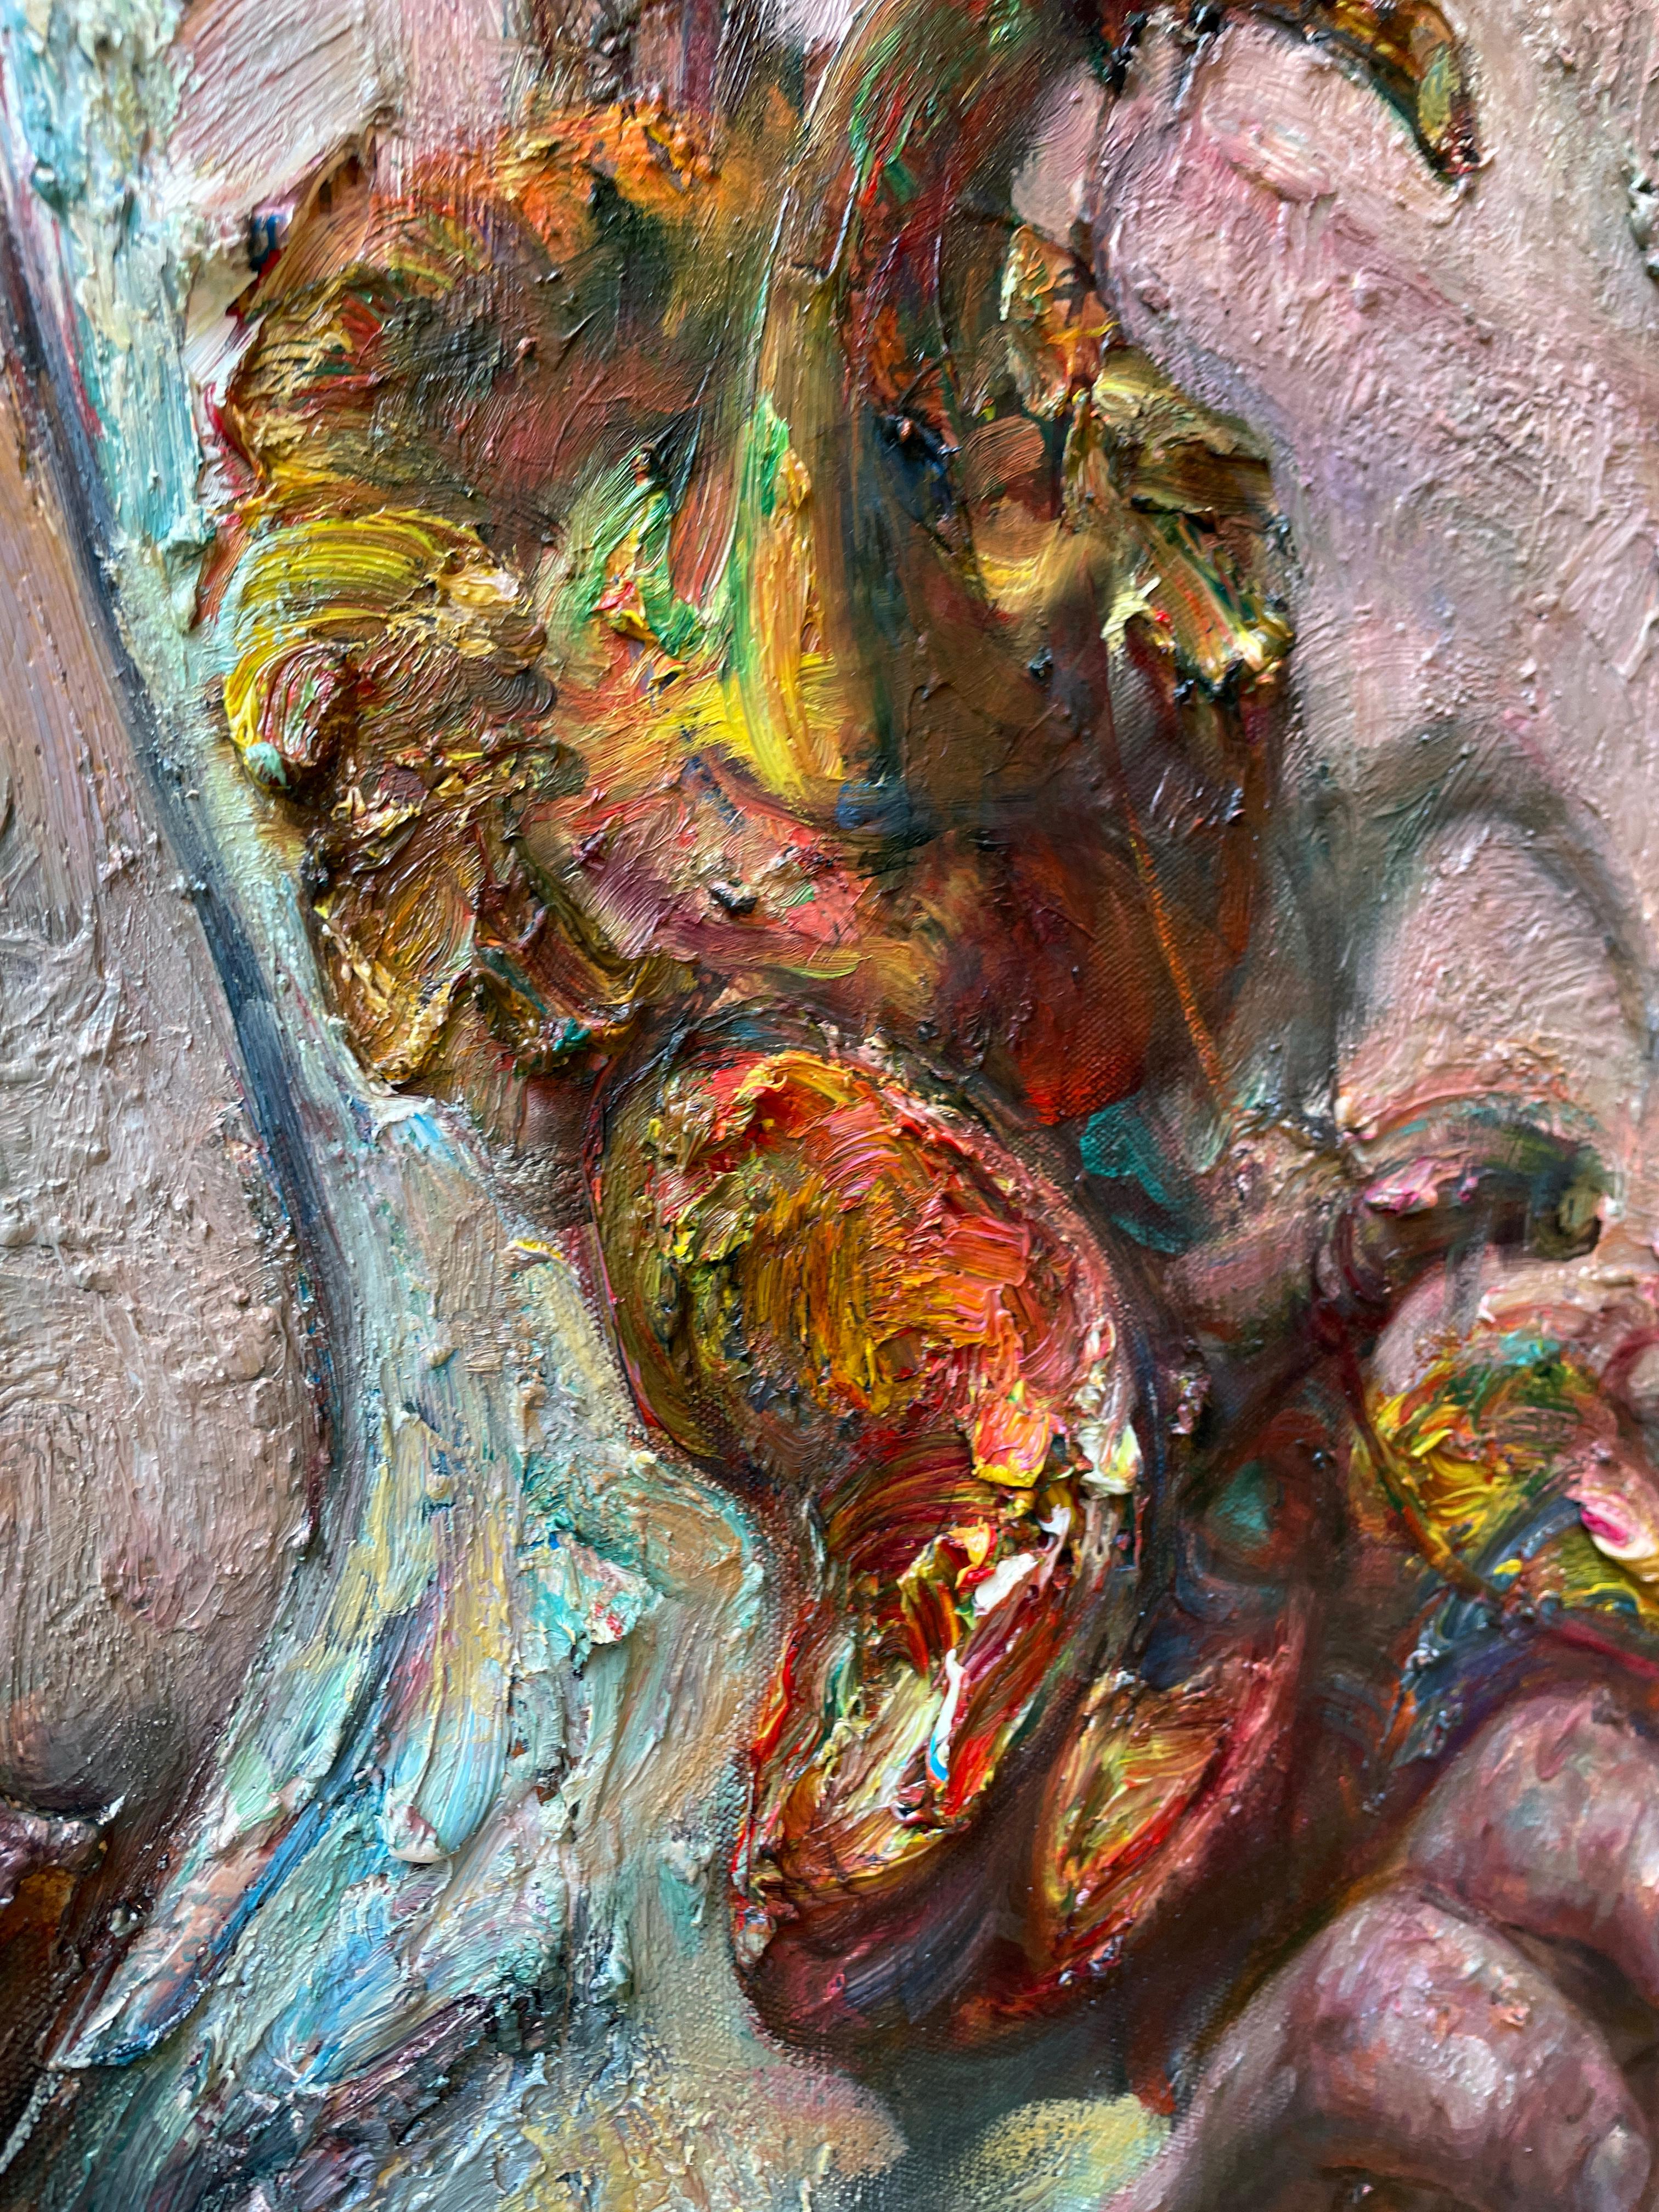 Victor Wang's highly textured paintings involve thick layers of paint in deep saturated colors.  In 